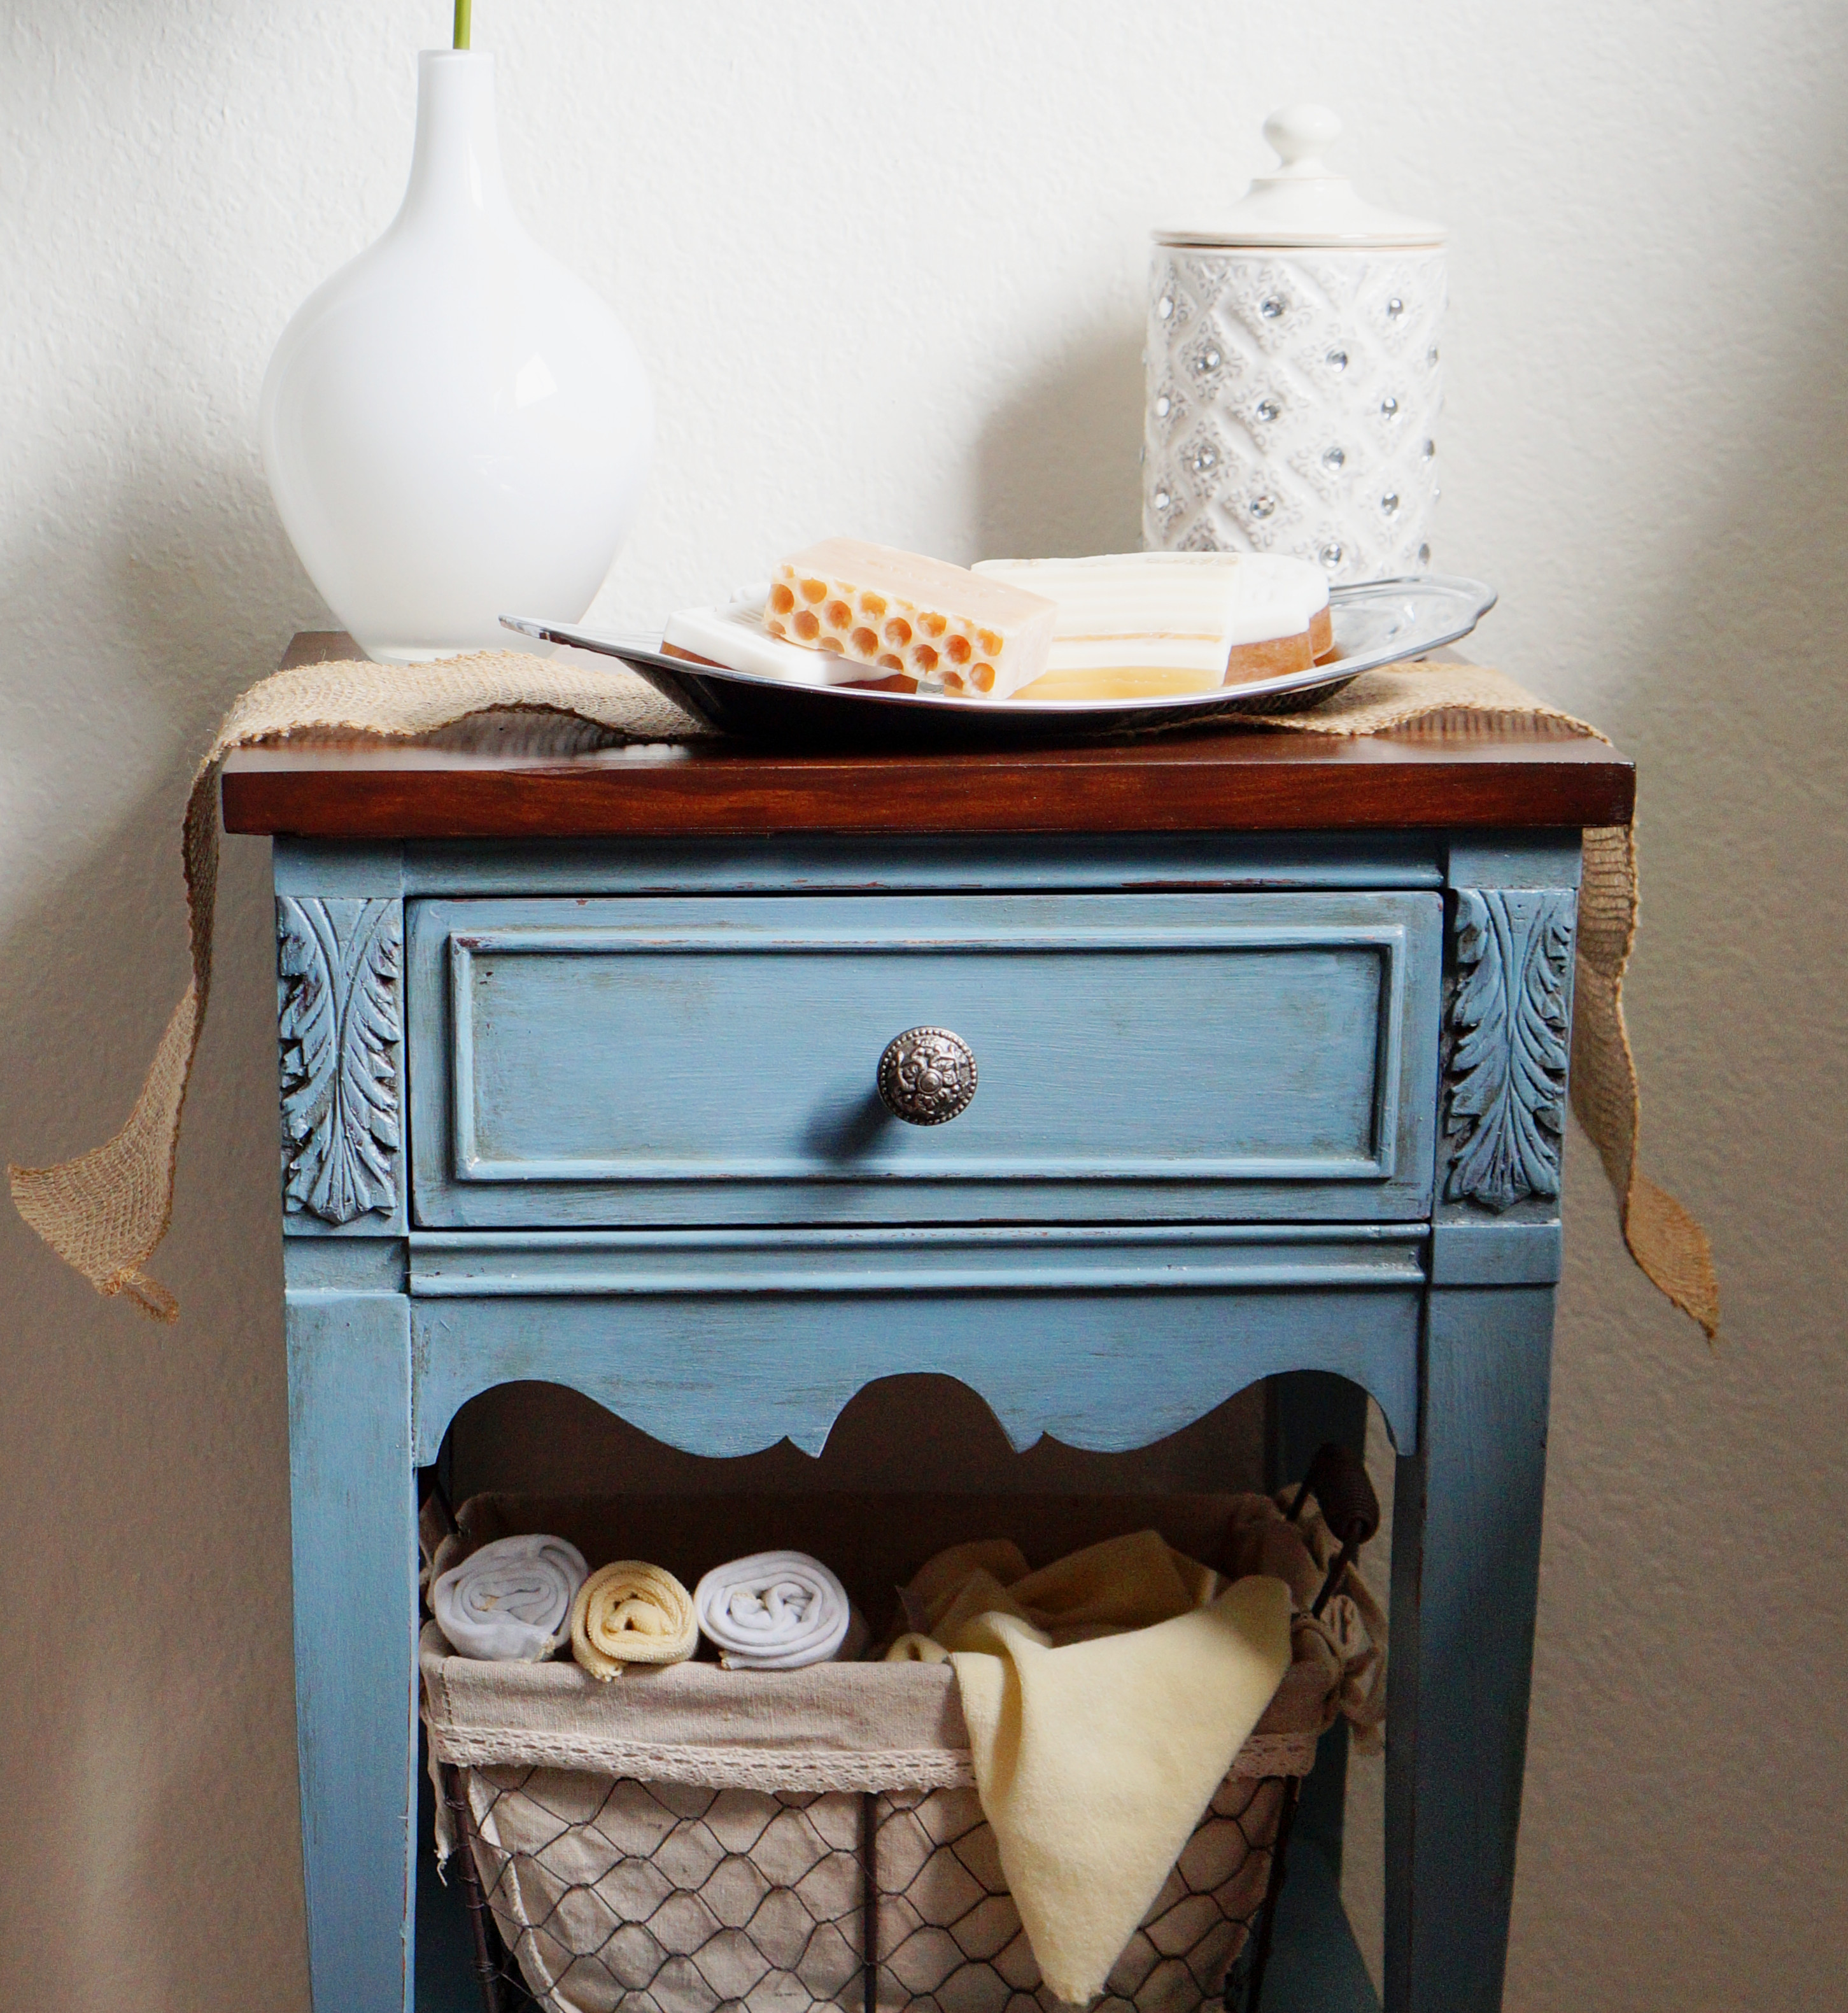 A cute side table in “Lyric Blue”